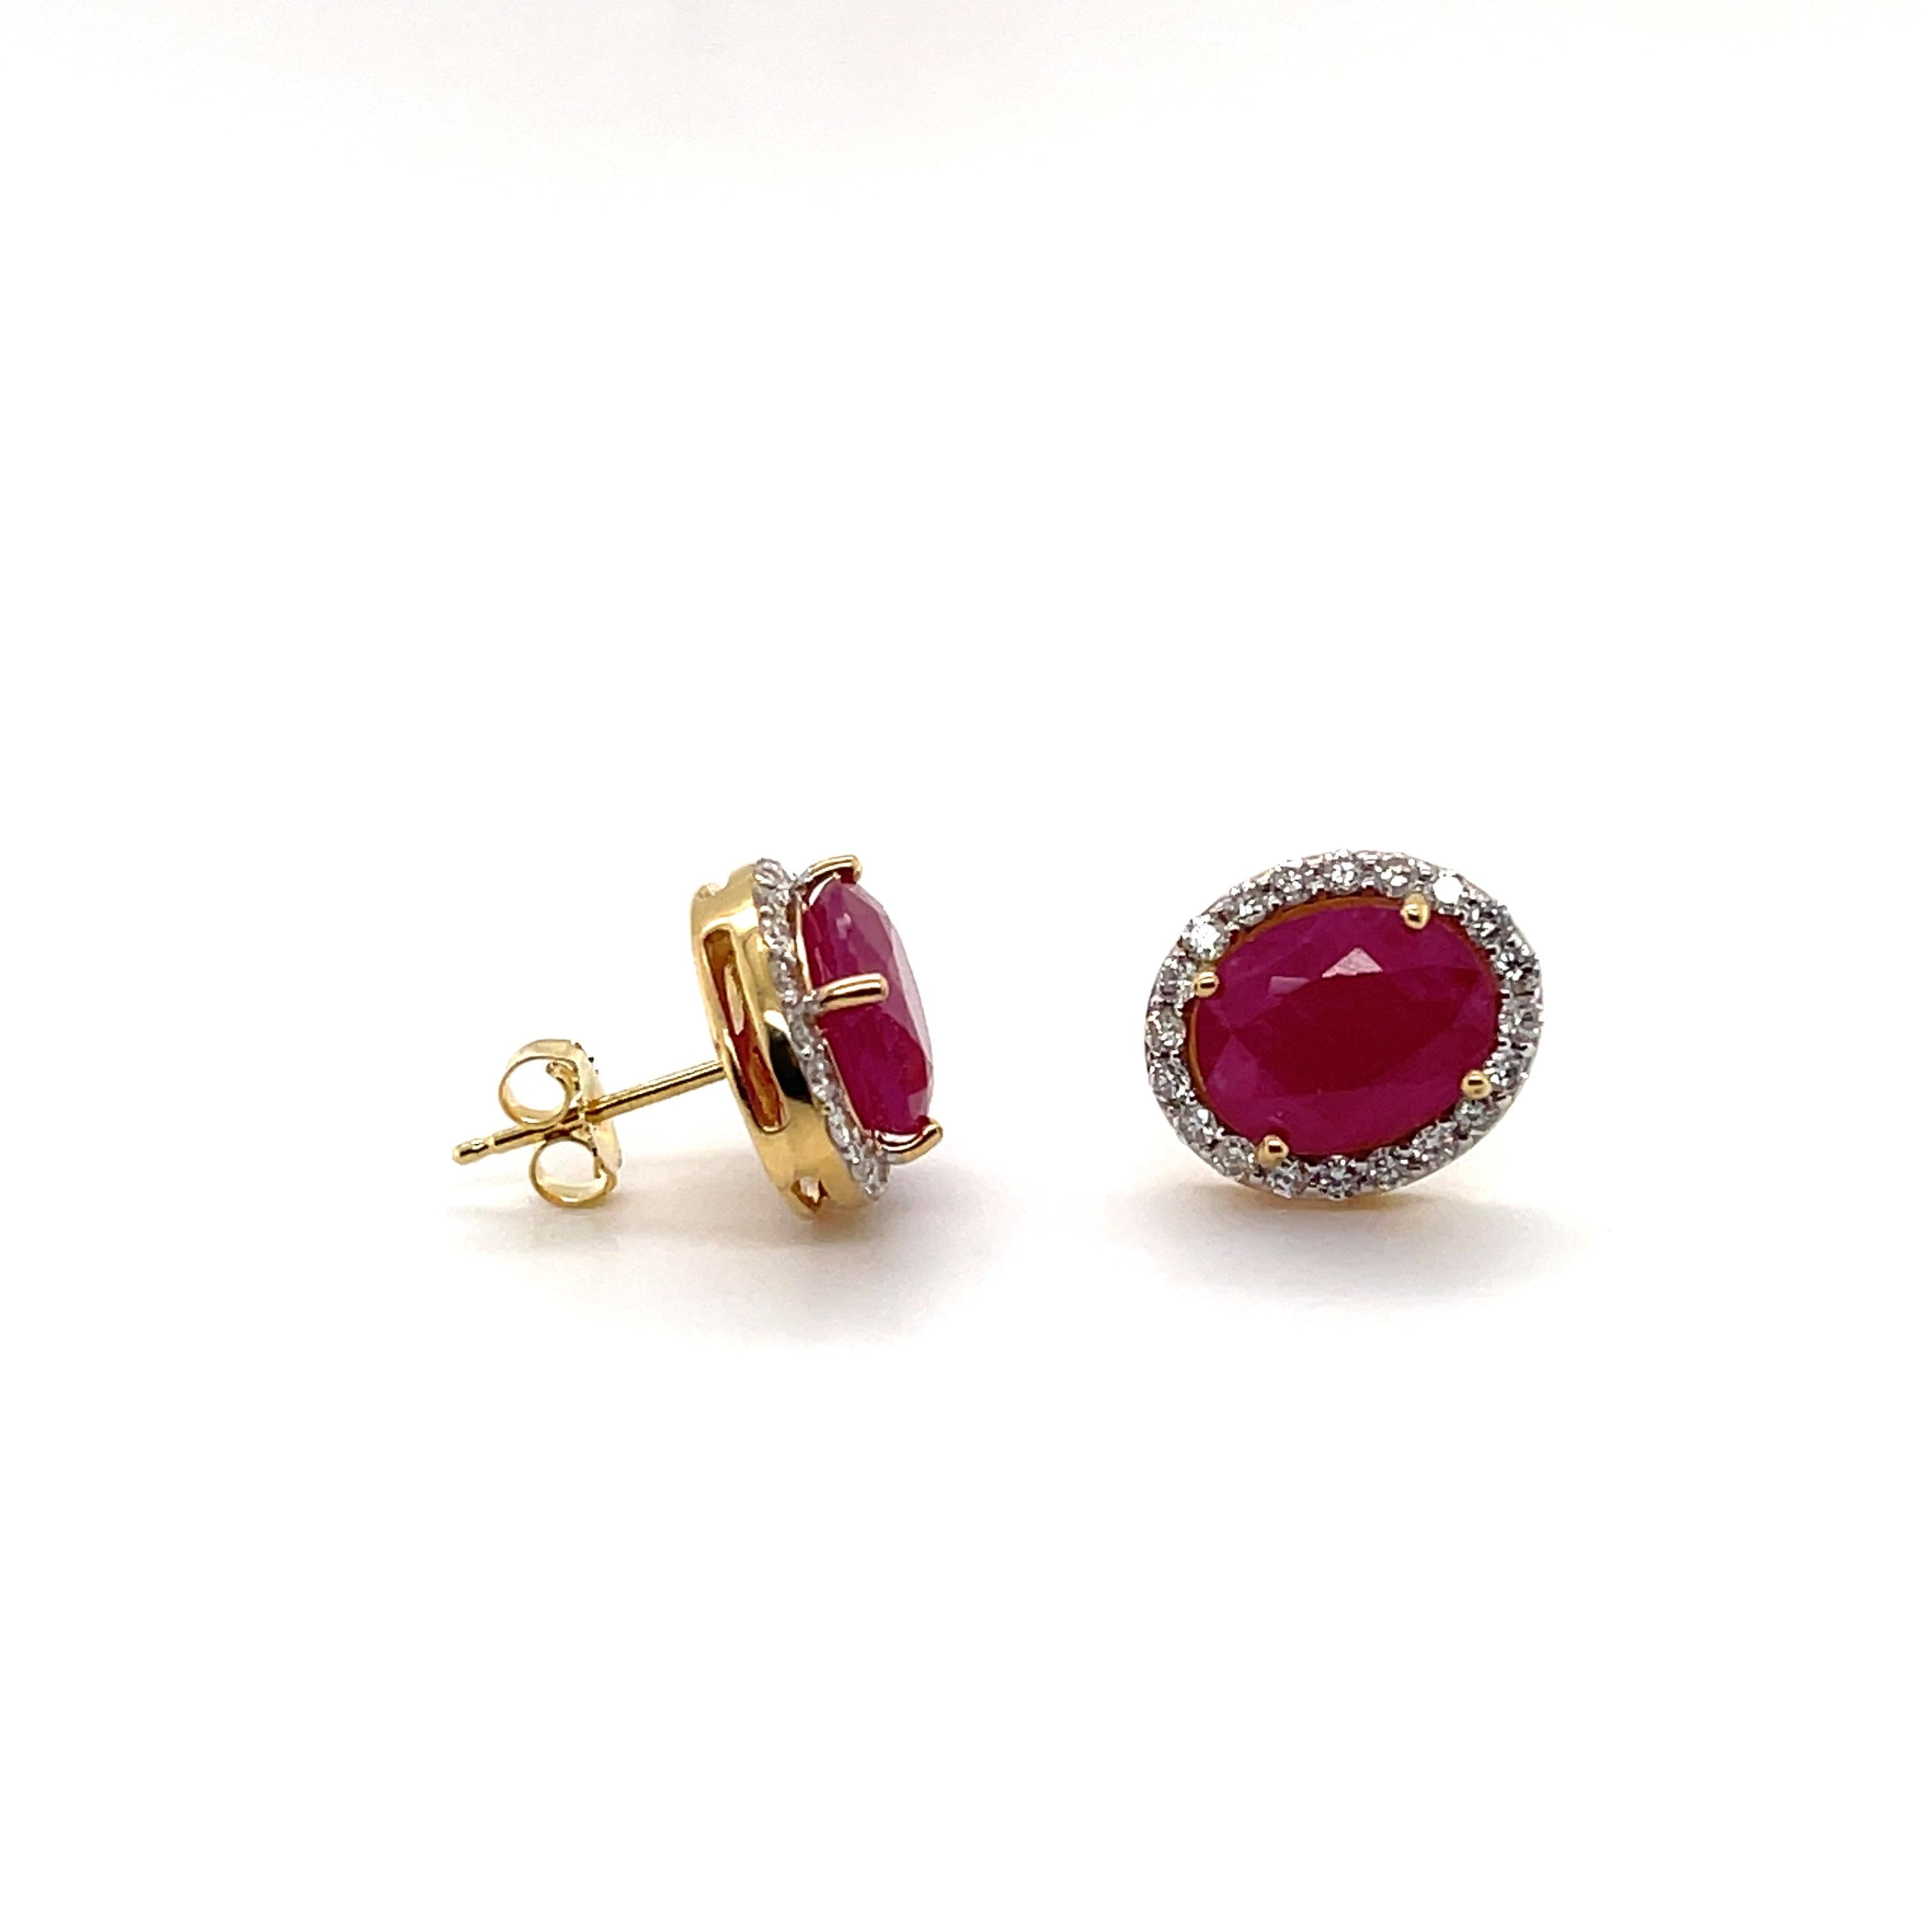 Two claw set oval shaped rubies, crafted in Eighteen Karat Yellow Gold, featuring a remarkable set of claw set round brilliant cut diamonds, complemented with a beautiful polish finished design. 

Total Ruby Weight: 6.36ct
Ruby Grade/Colour: 